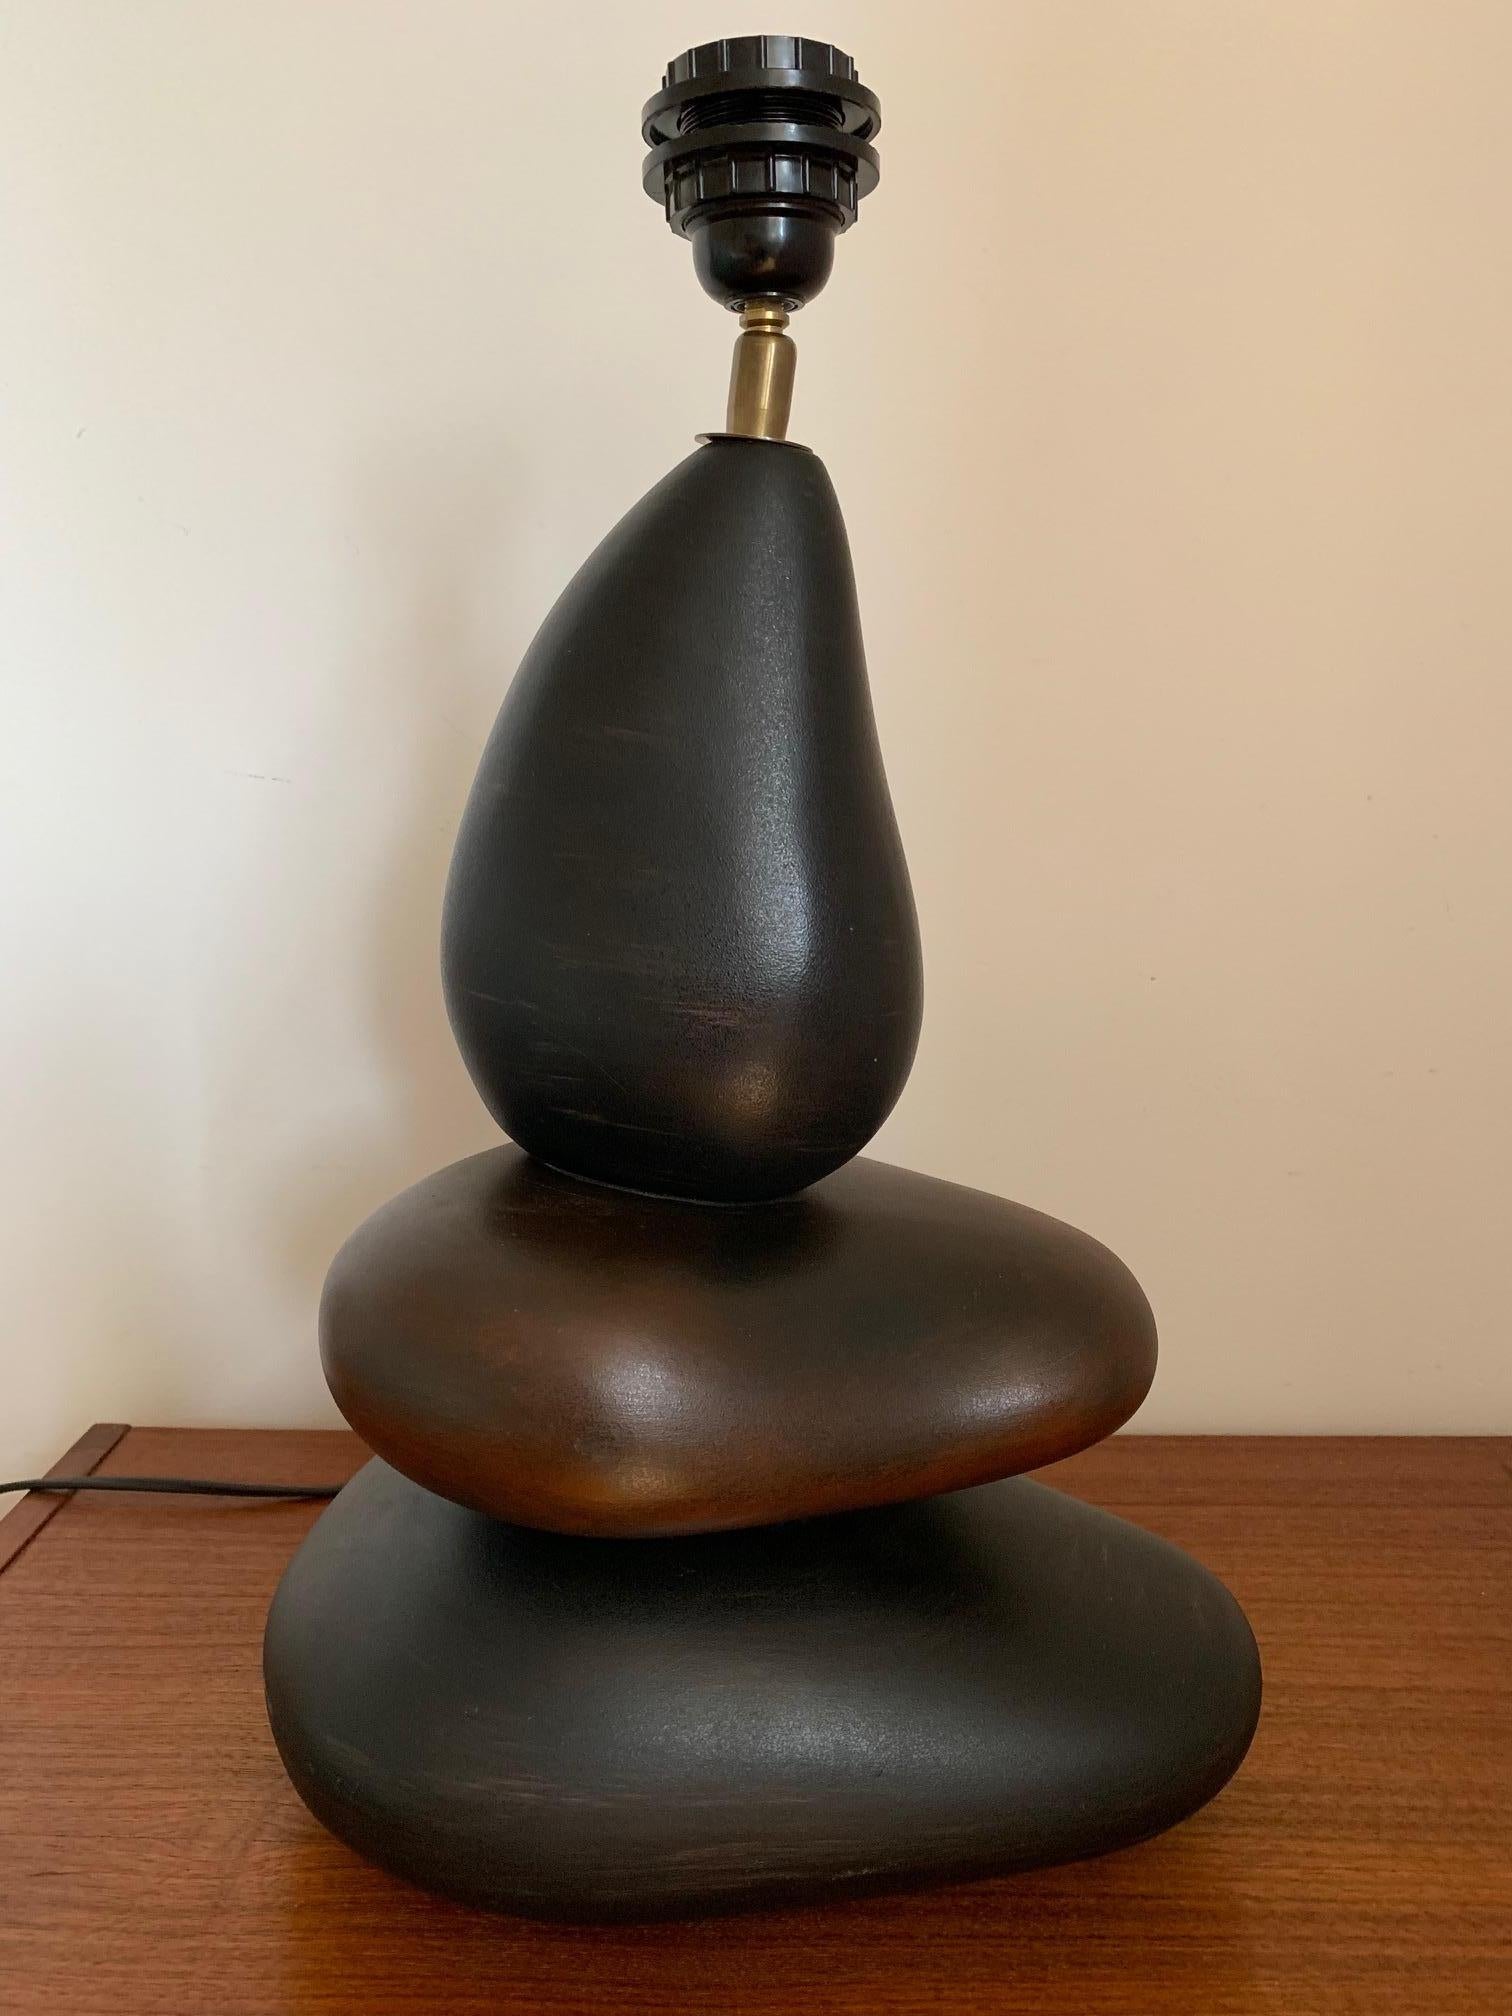 Lamp designed by François Chatain from the 1970s fully original and signed. As befits a Chatain lamp is a horizontally adjustable brass joint under the bakelite frame. One light spot E27. Original and original stylistics appreciated in the world of